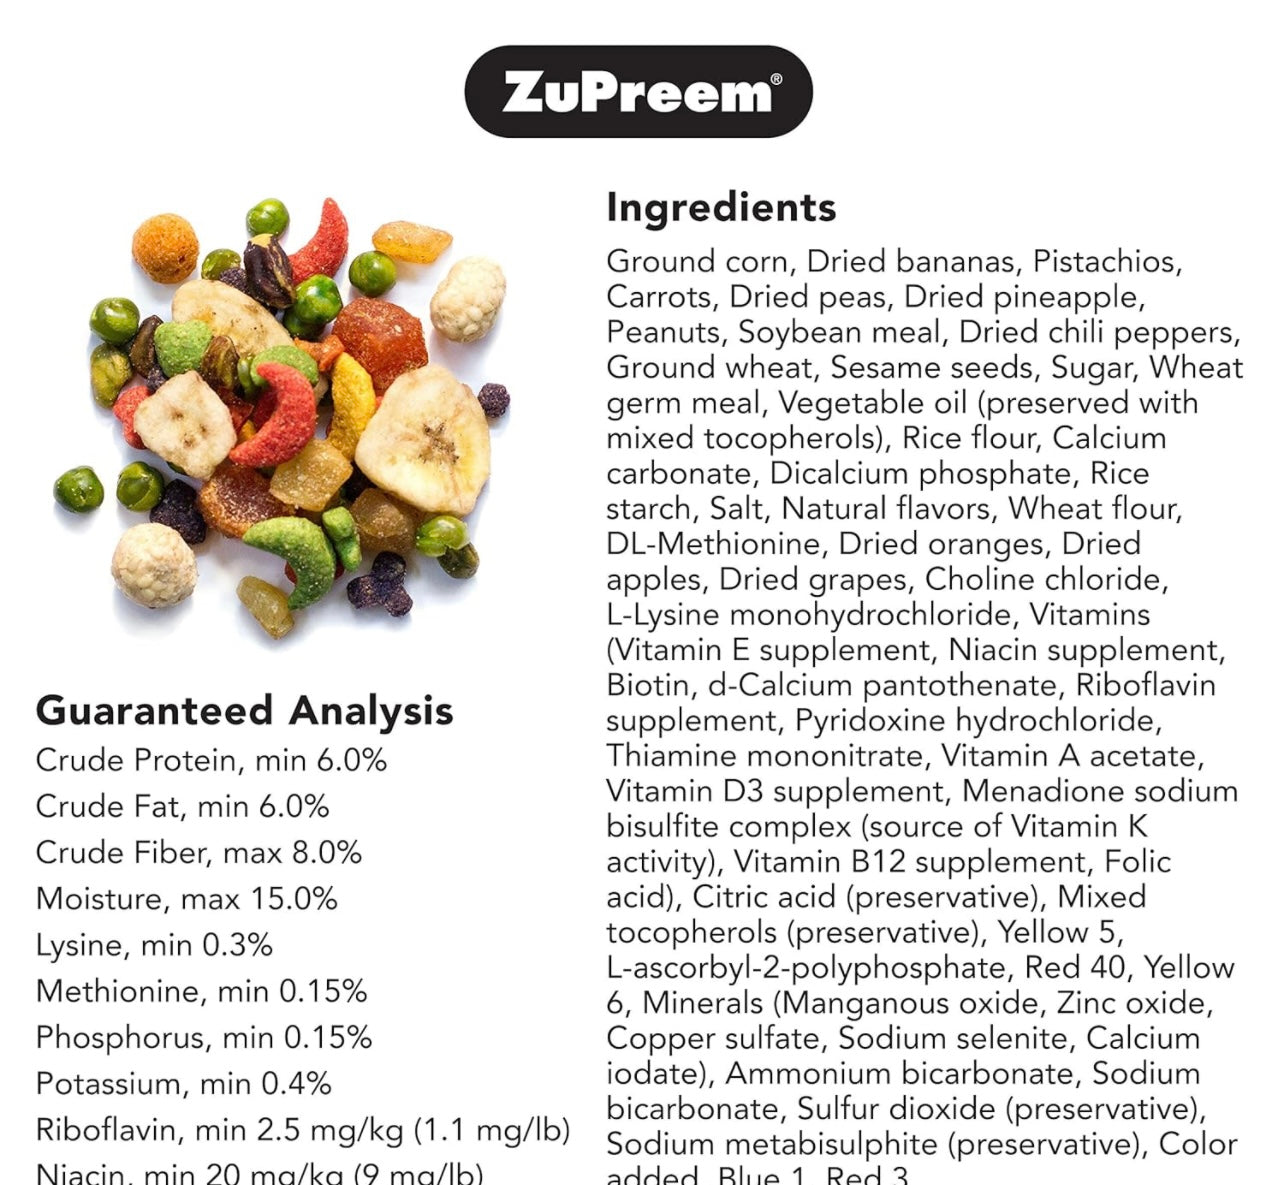 ZuPreem Pure Fun Bird Food for Large Birds, 2 lb - Variety Blend of Fruit, FruitBlend Pellets, Vegetables, Nuts for Amazons, Macaws, Cockatoos